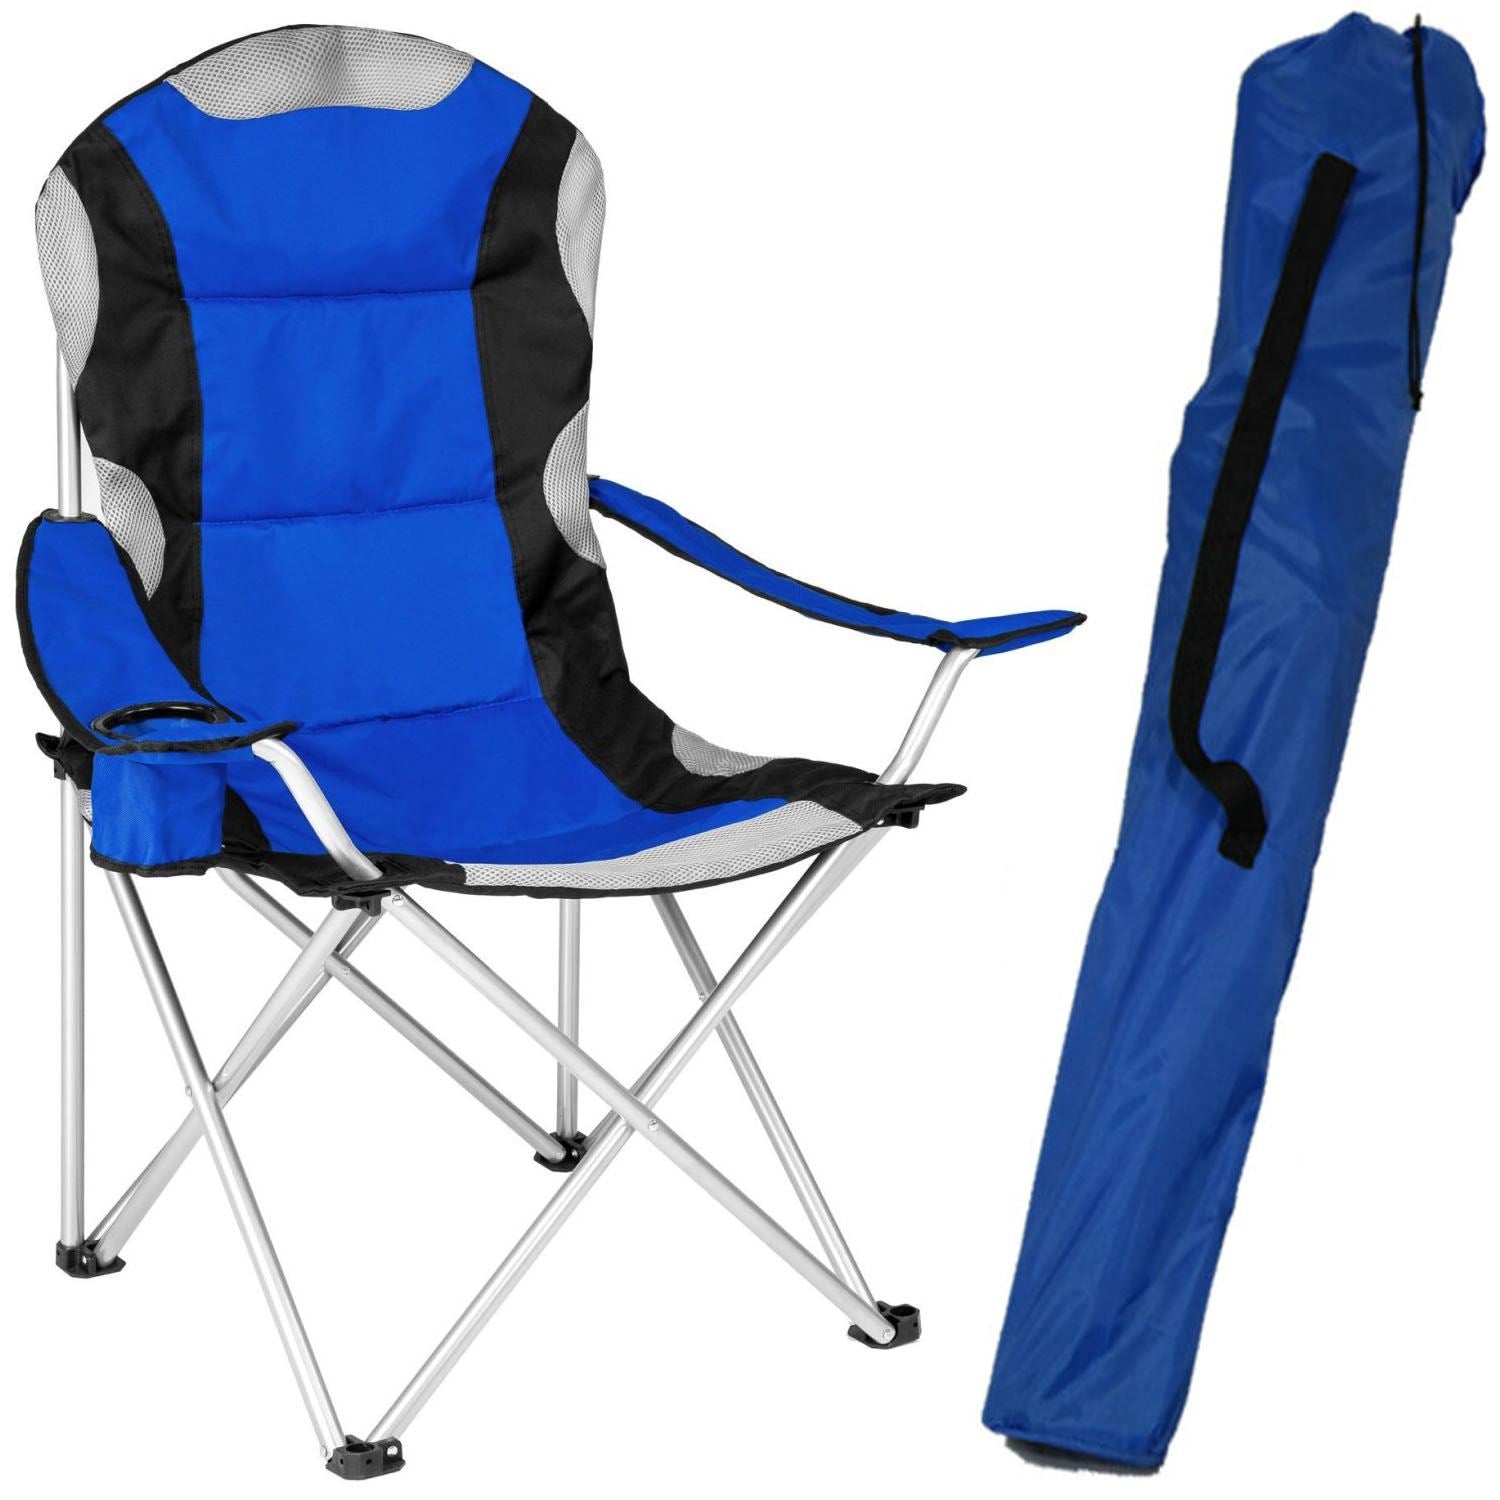  camping chairs luxury